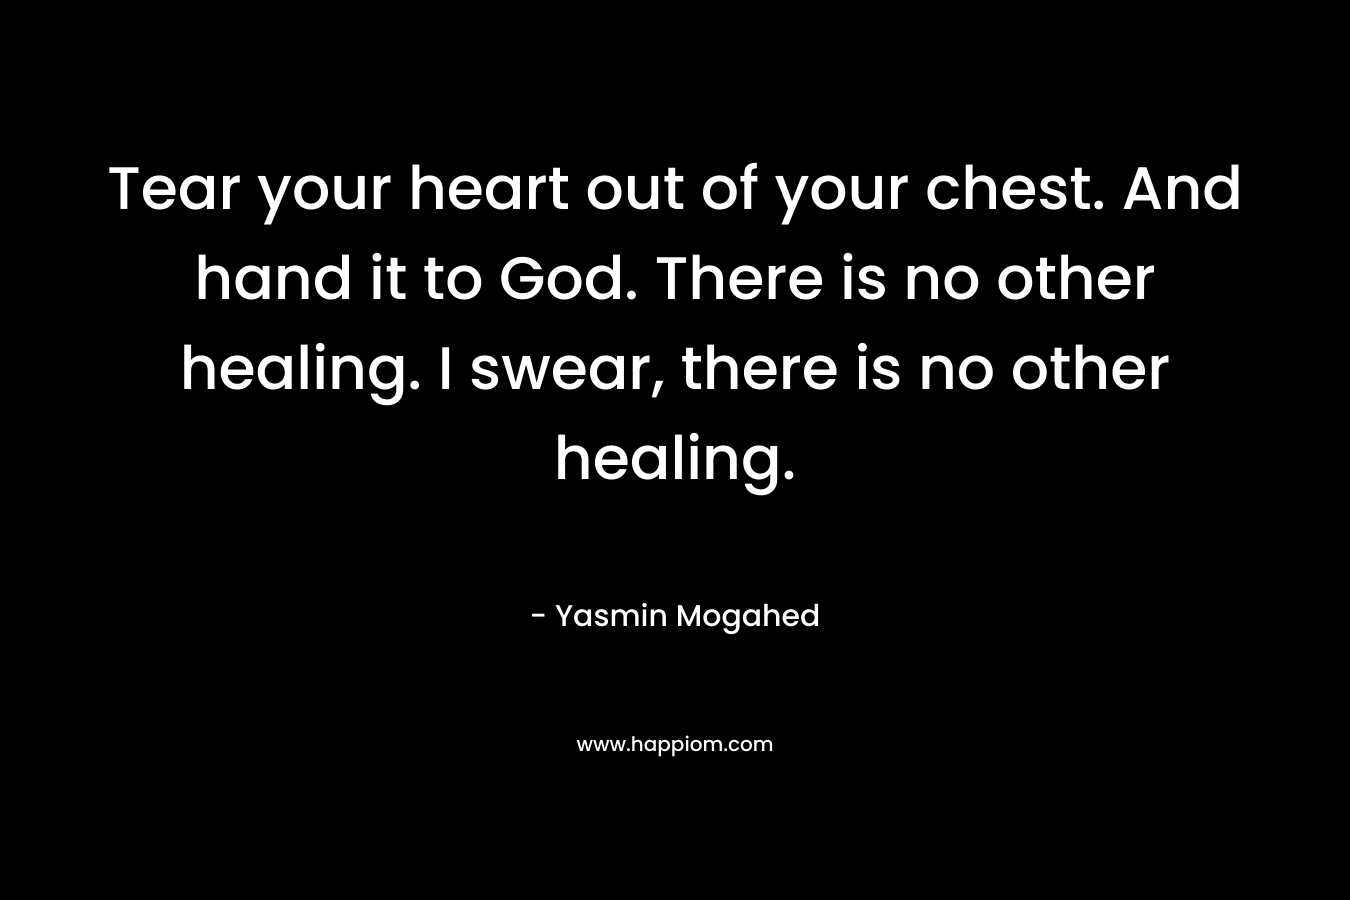 Tear your heart out of your chest. And hand it to God. There is no other healing. I swear, there is no other healing.